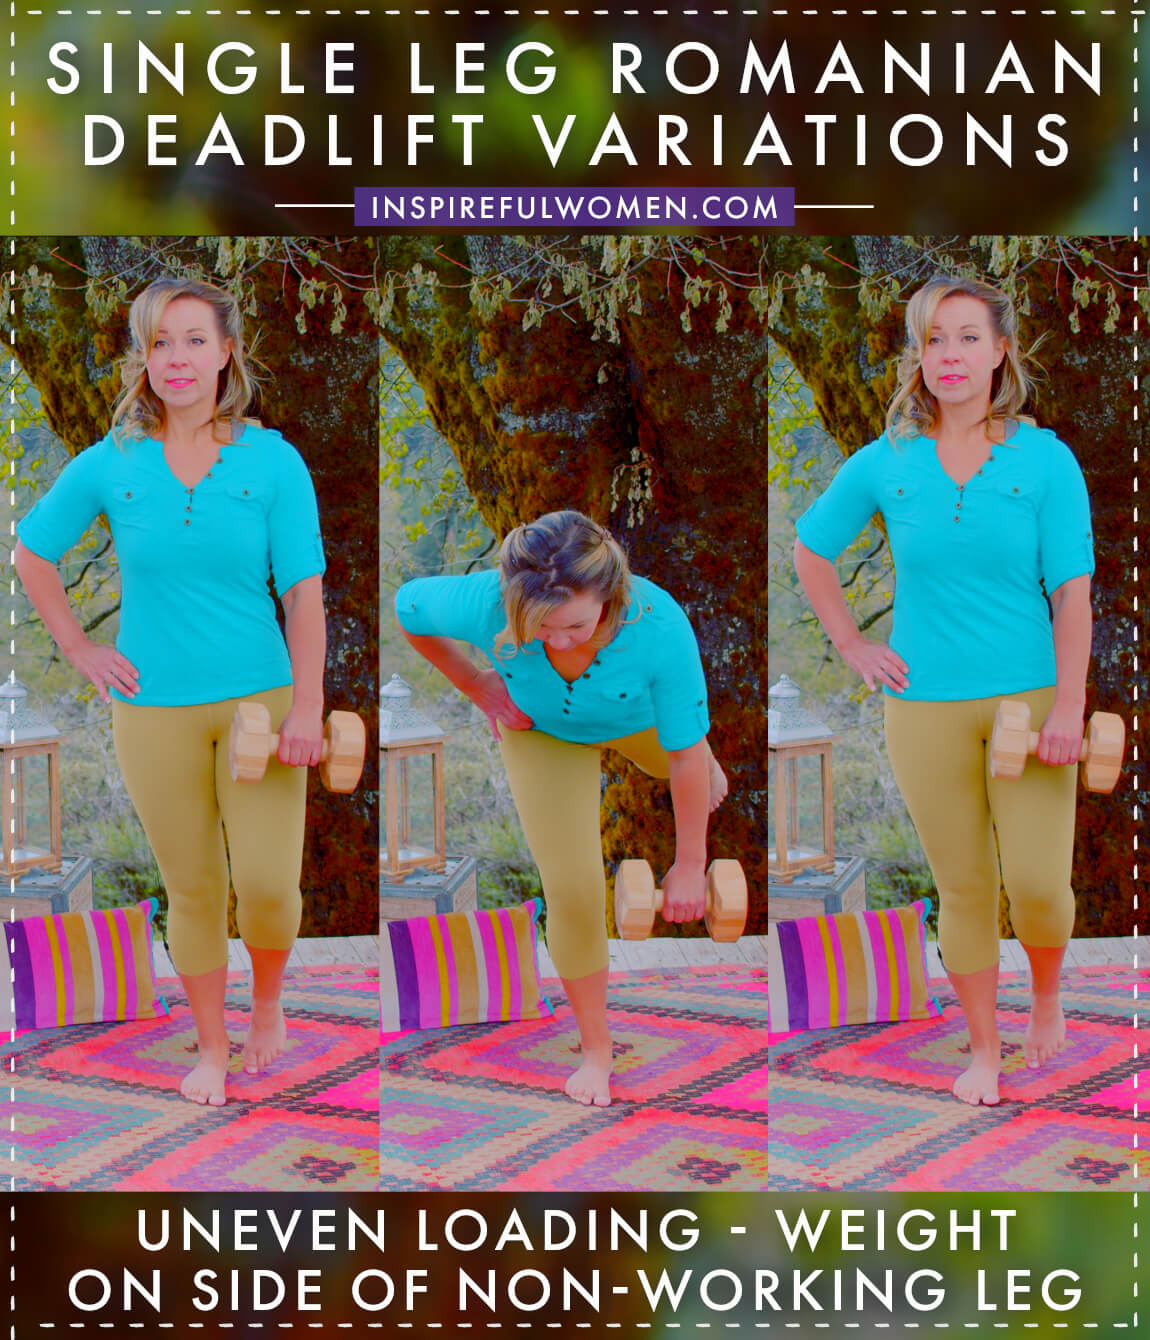 uneven-loading-weight-on-side-of-non-working-leg-one-leg-romanian-deadlift-variation